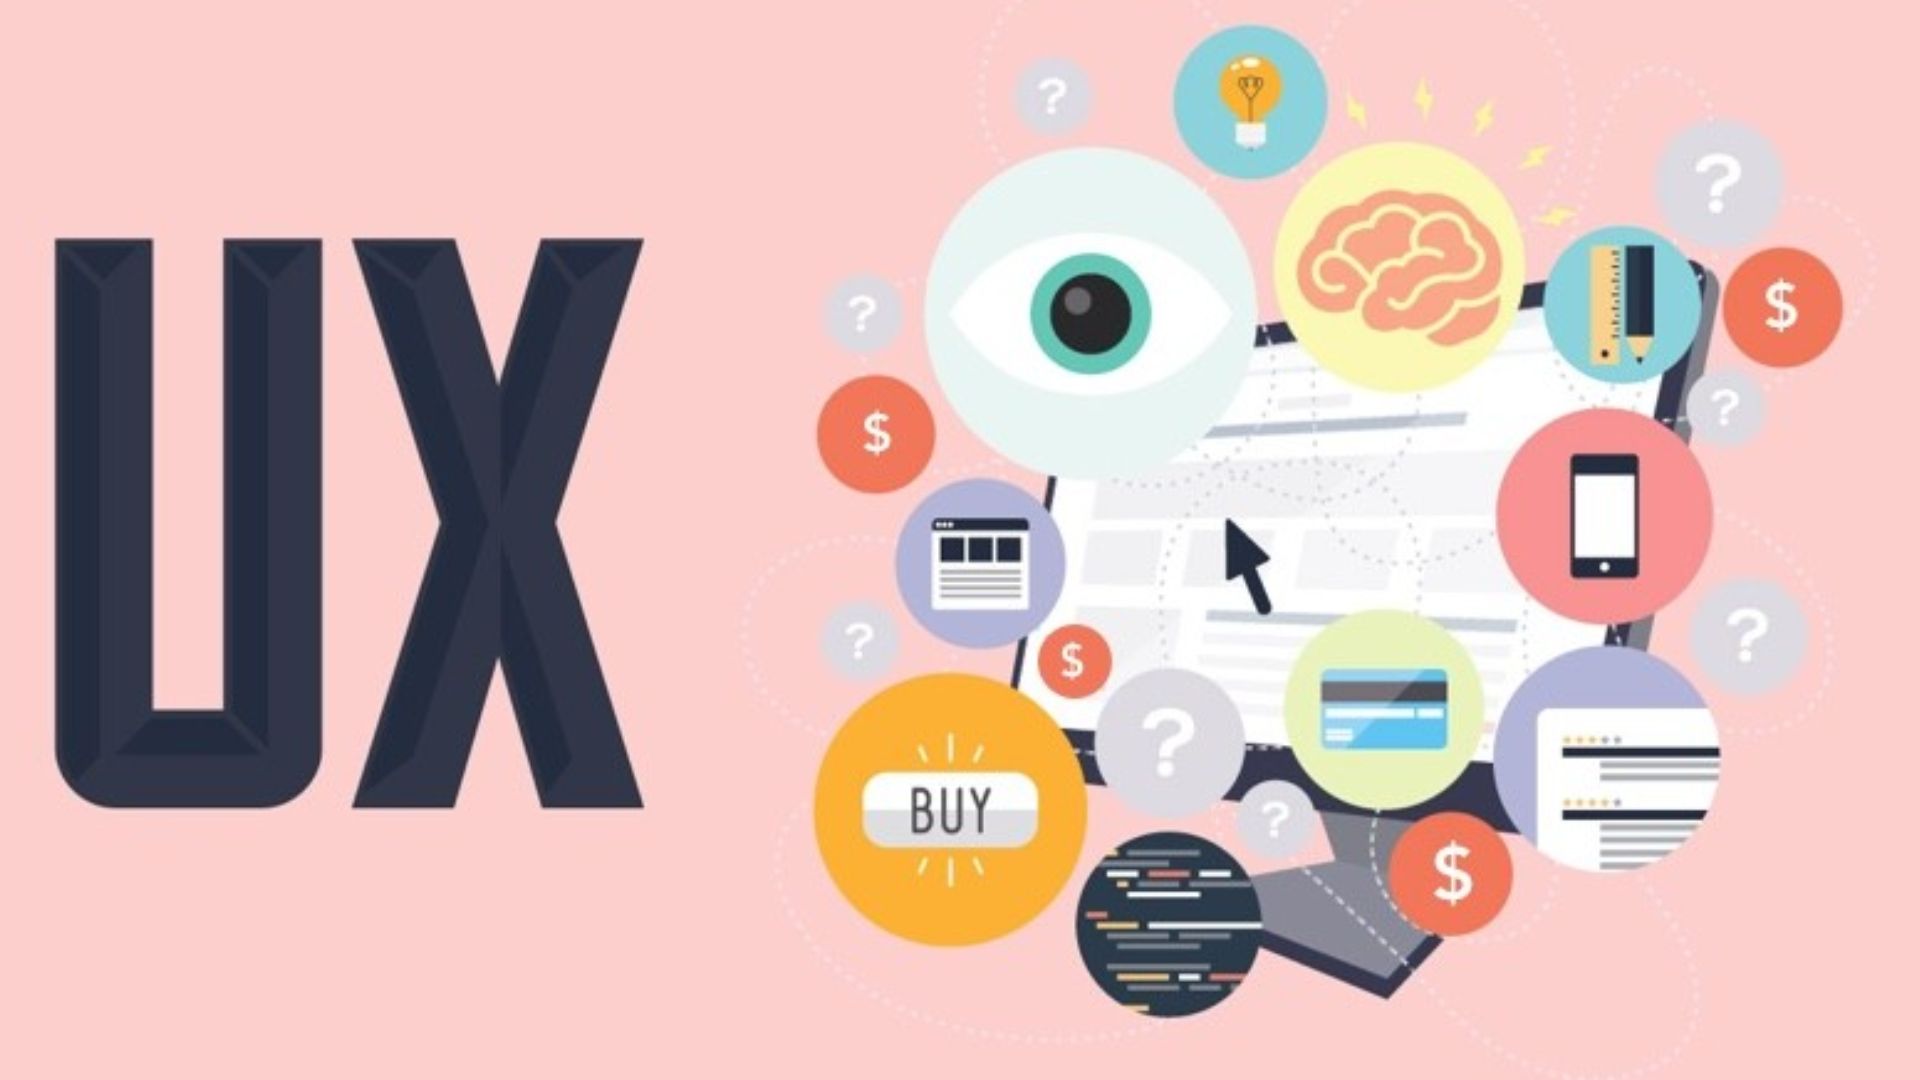 How Are UX And Digital Marketing Related?